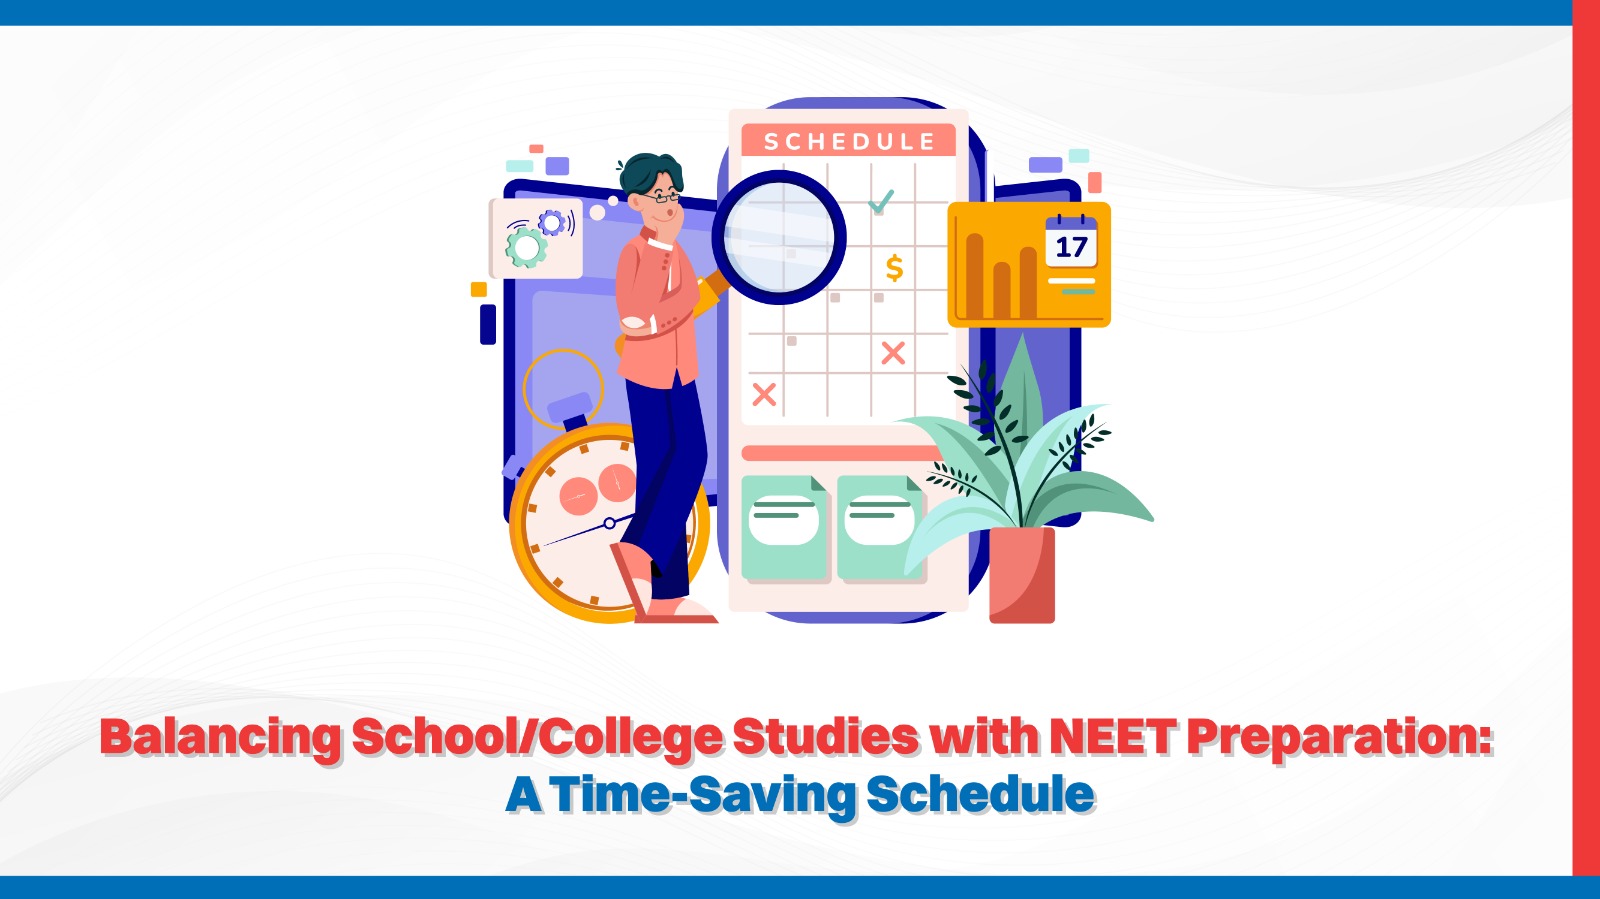 Balancing School/College Studies with NEET Preparation: A Time-Saving Schedule